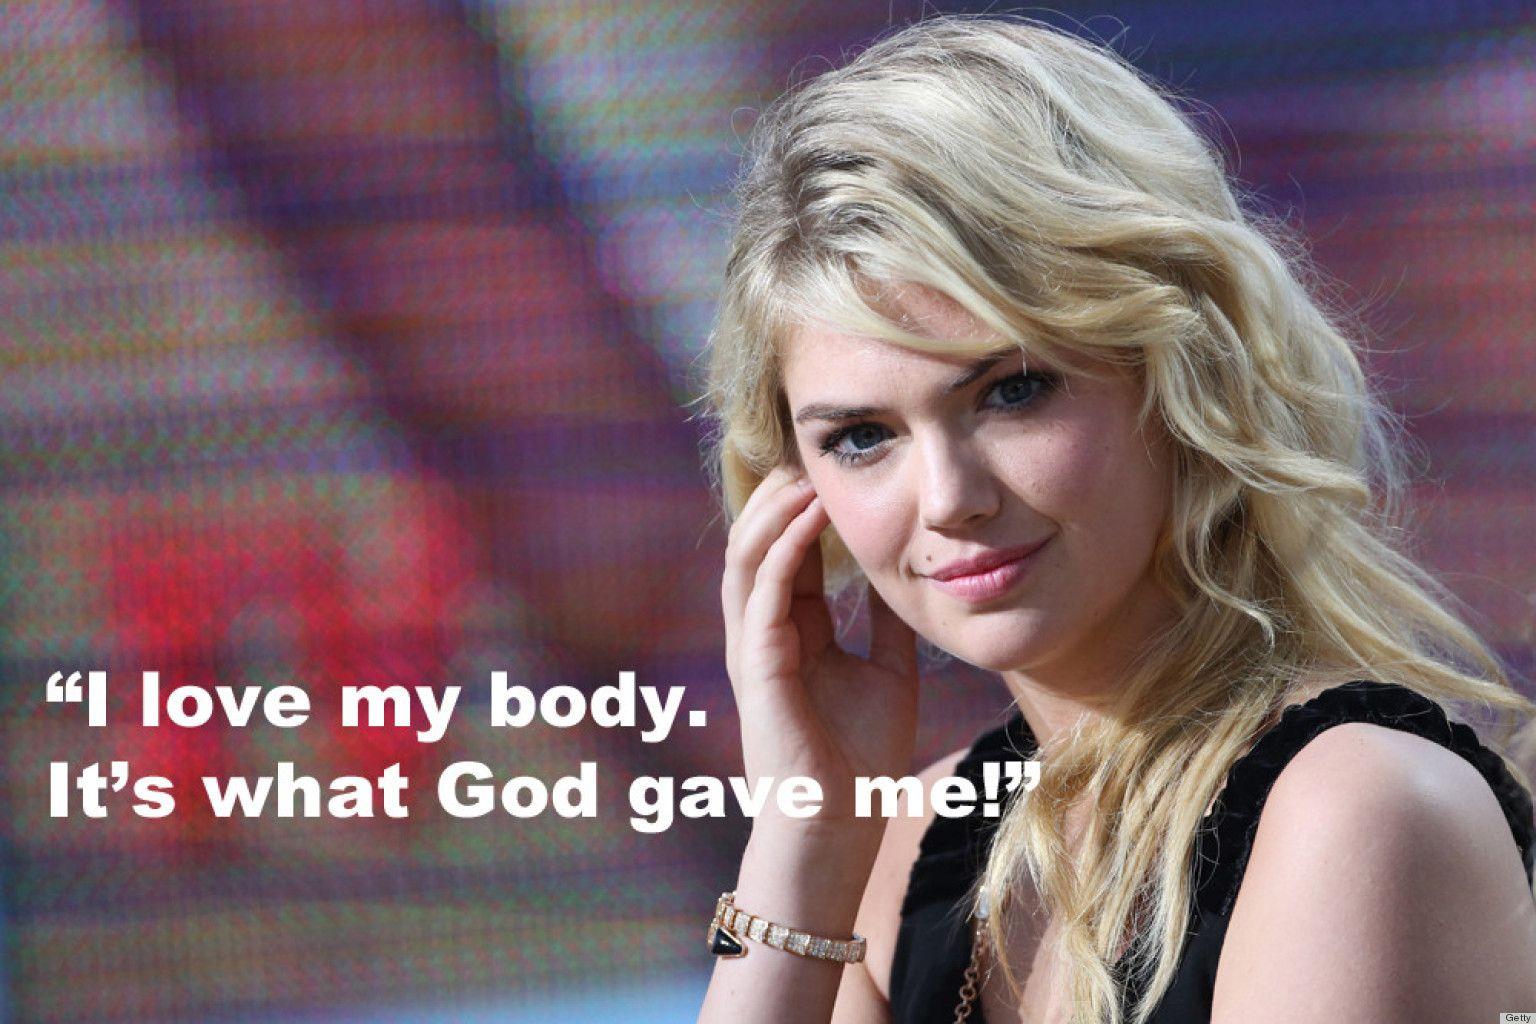 Kate Upton Body Image Quotes, And More Reasons To Love The Model